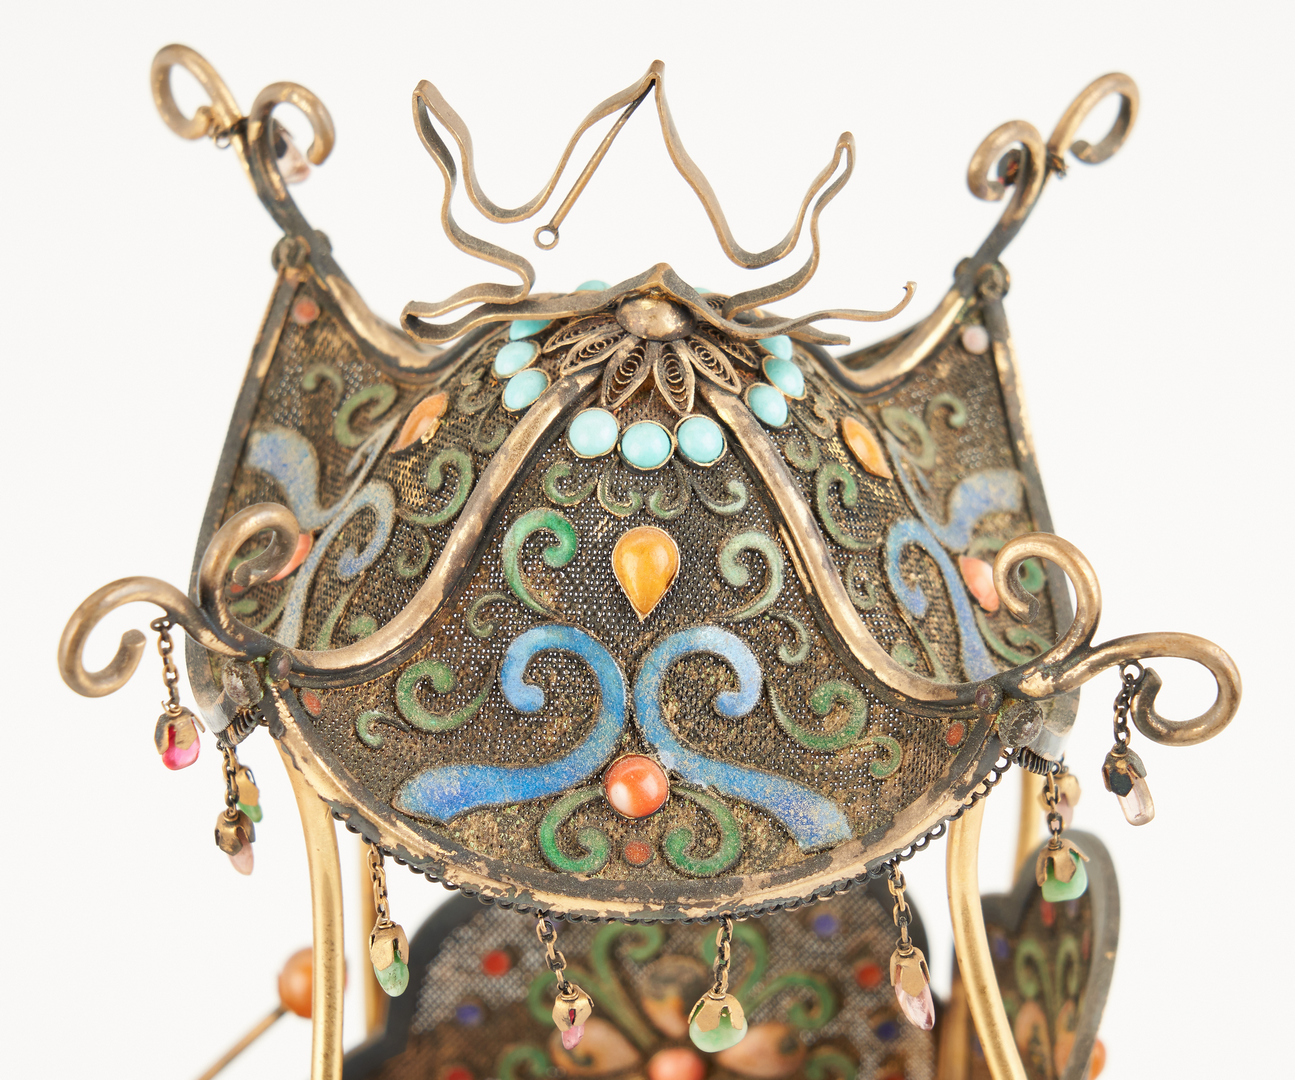 Lot 8: Chinese Filigree and Enamel Carriage